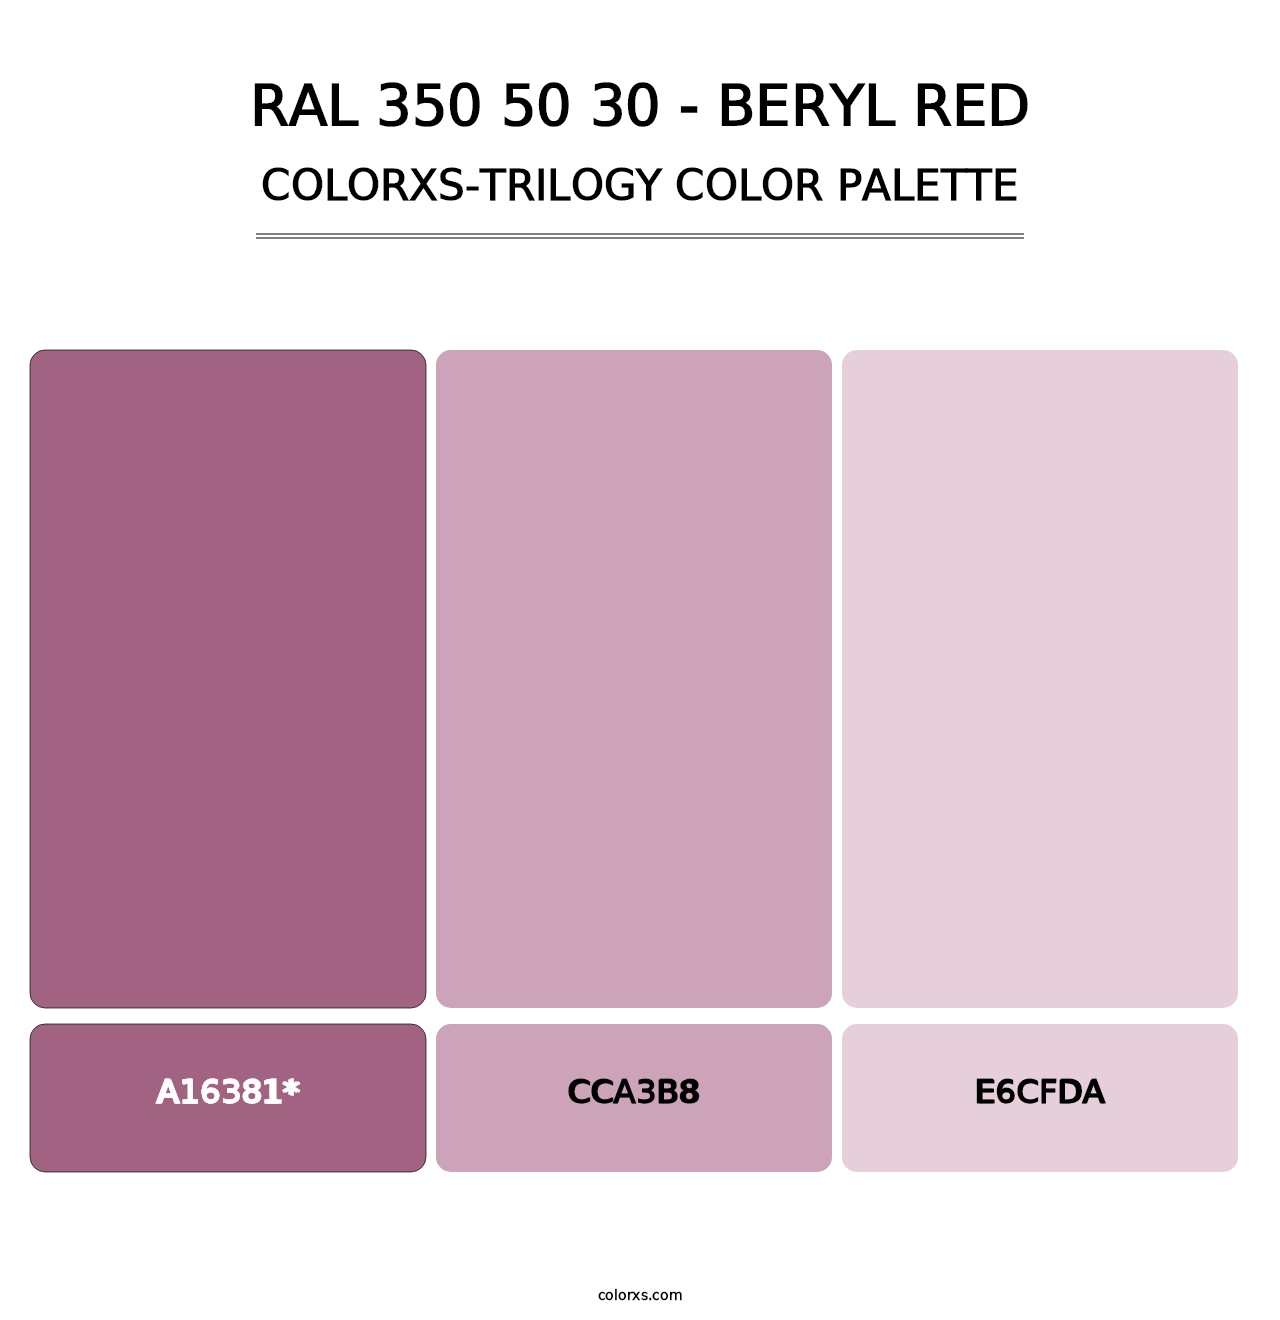 RAL 350 50 30 - Beryl Red - Colorxs Trilogy Palette